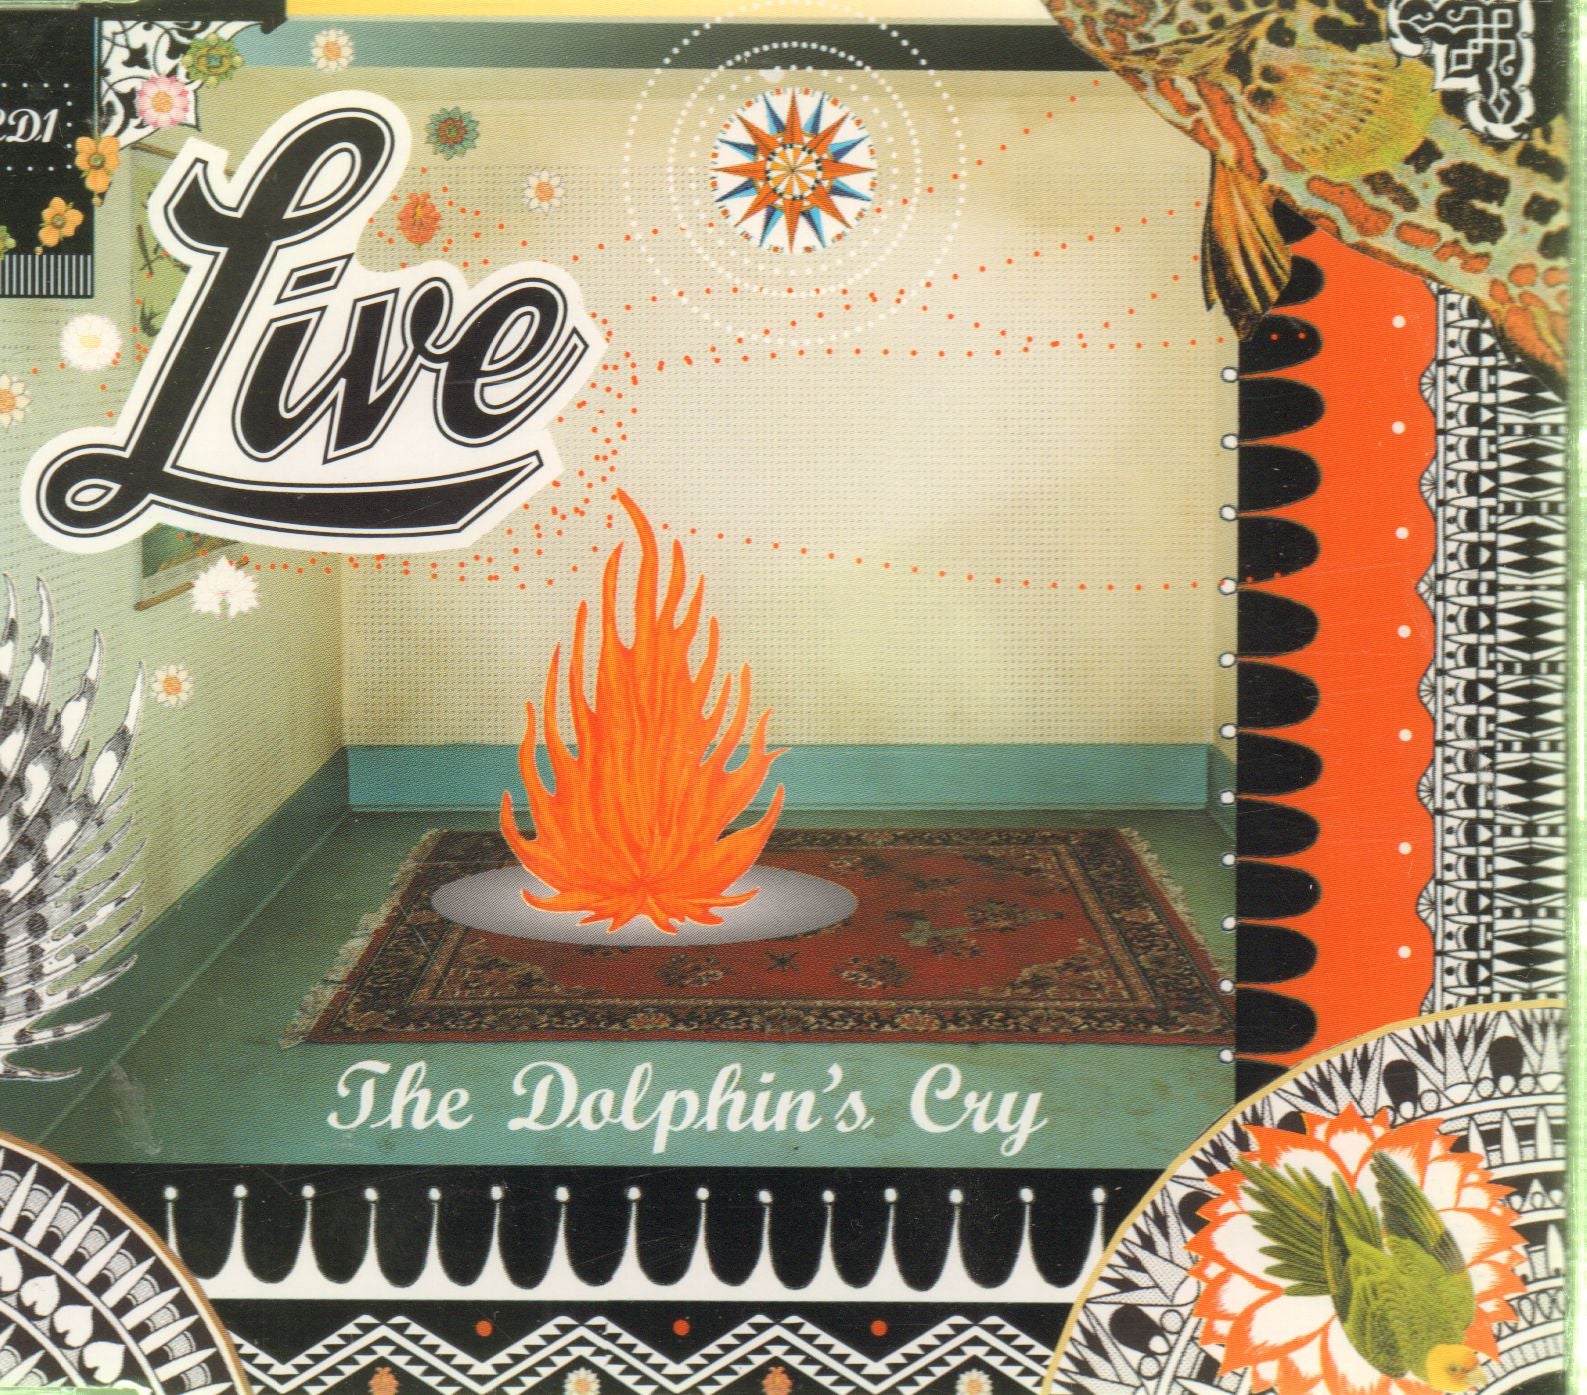 Live-Dolphins Cry -CD Single